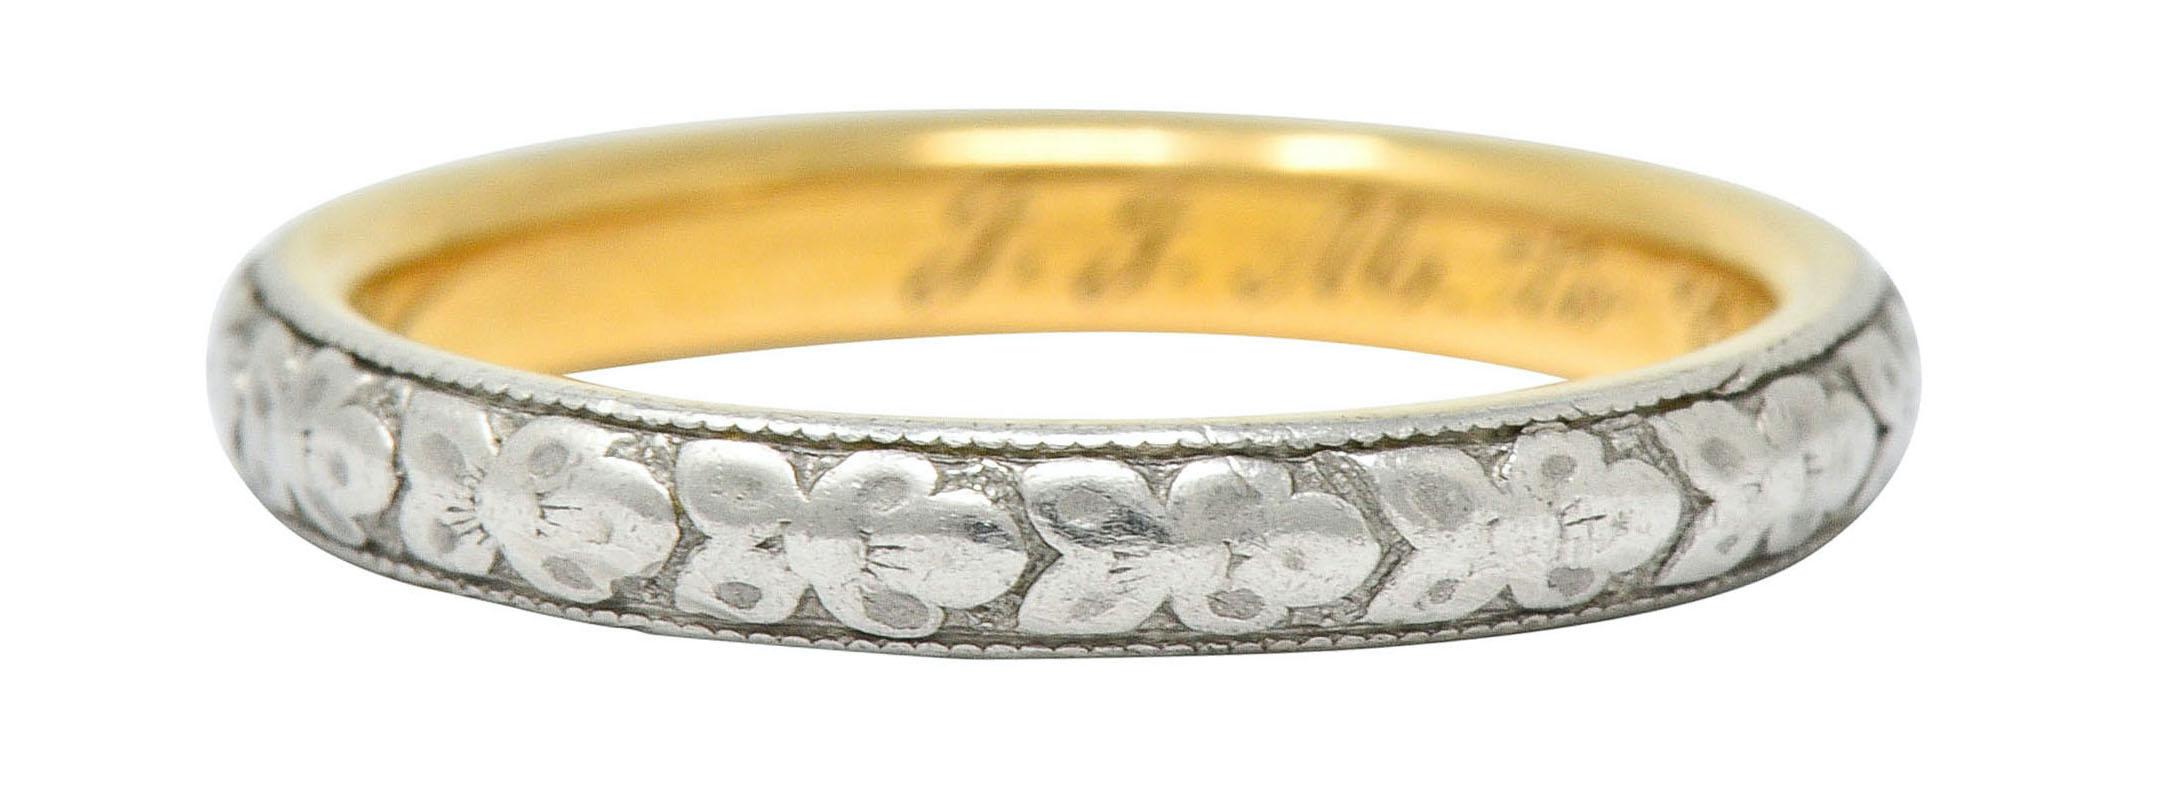 Band ring features a highly rendered platinum floral motif, fully around

Inner shank is yellow gold with a dated inscription

Stamped 18K for 18 karat gold and tested as platinum-topped

Circa: 1920s

Ring Size: 4 1/2 & not sizable

Measures: 2.5